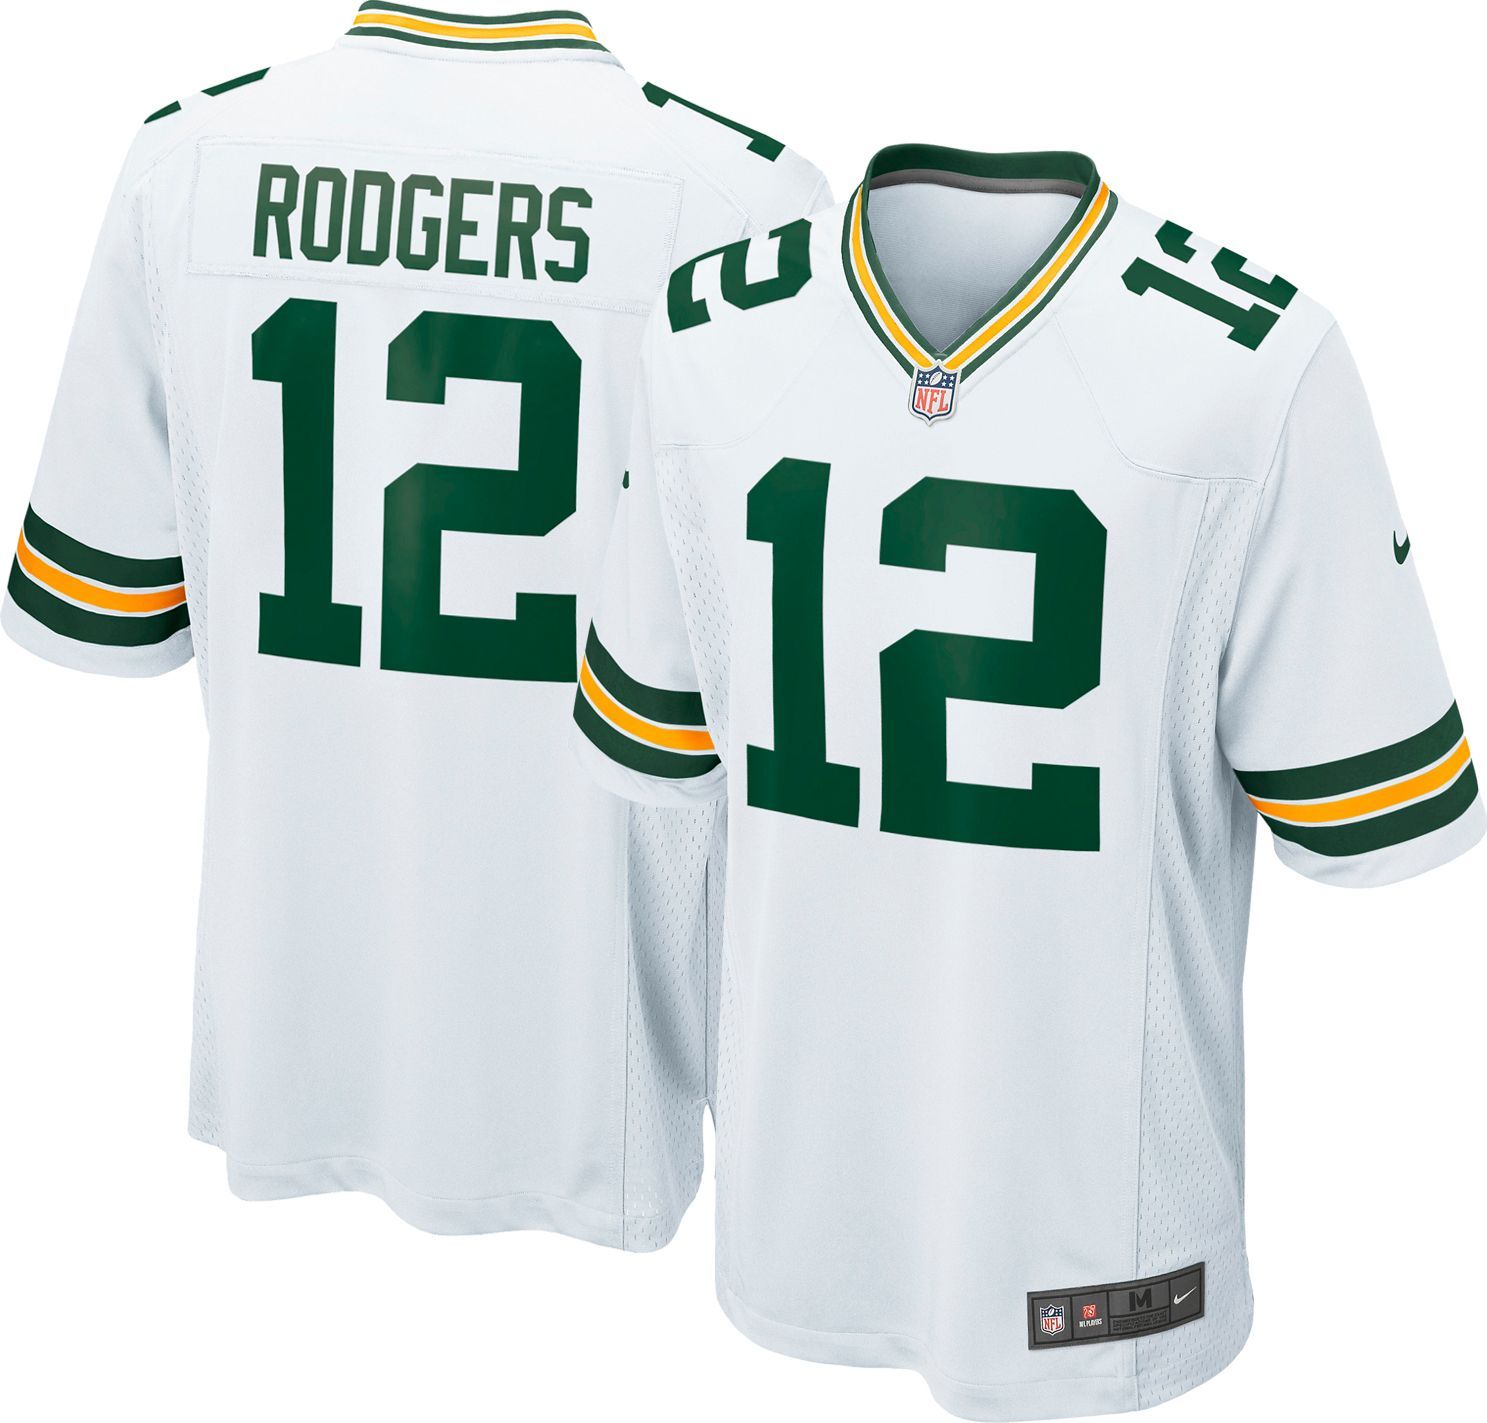 white green bay packers jersey